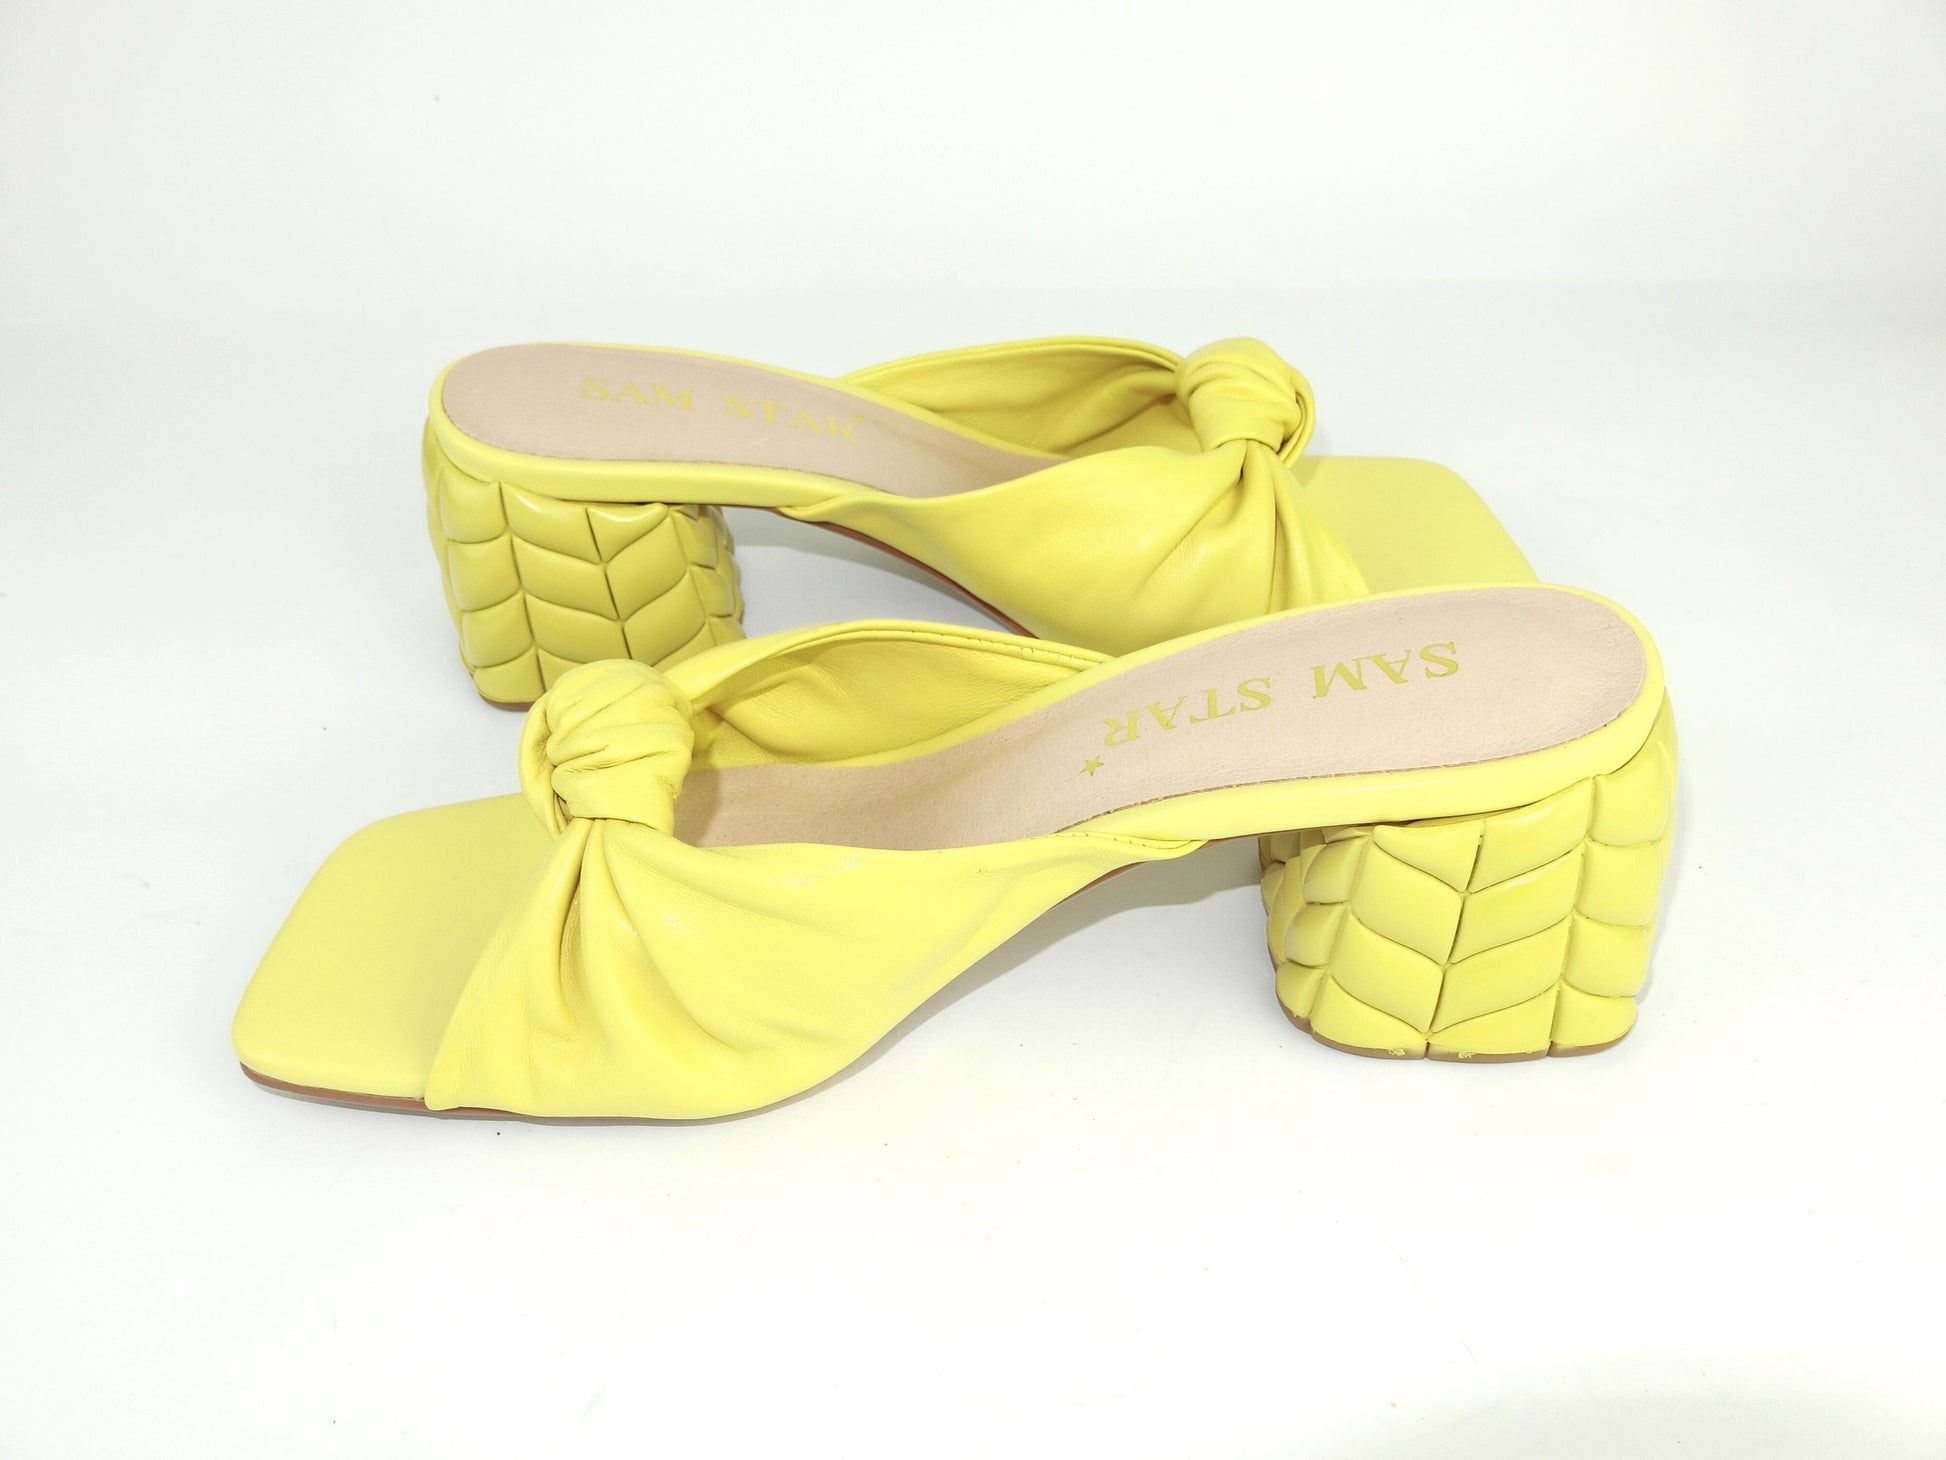 SS22014 Genuine leather bow tie block heel sandals in Yellow sandals Sam Star Shoes 